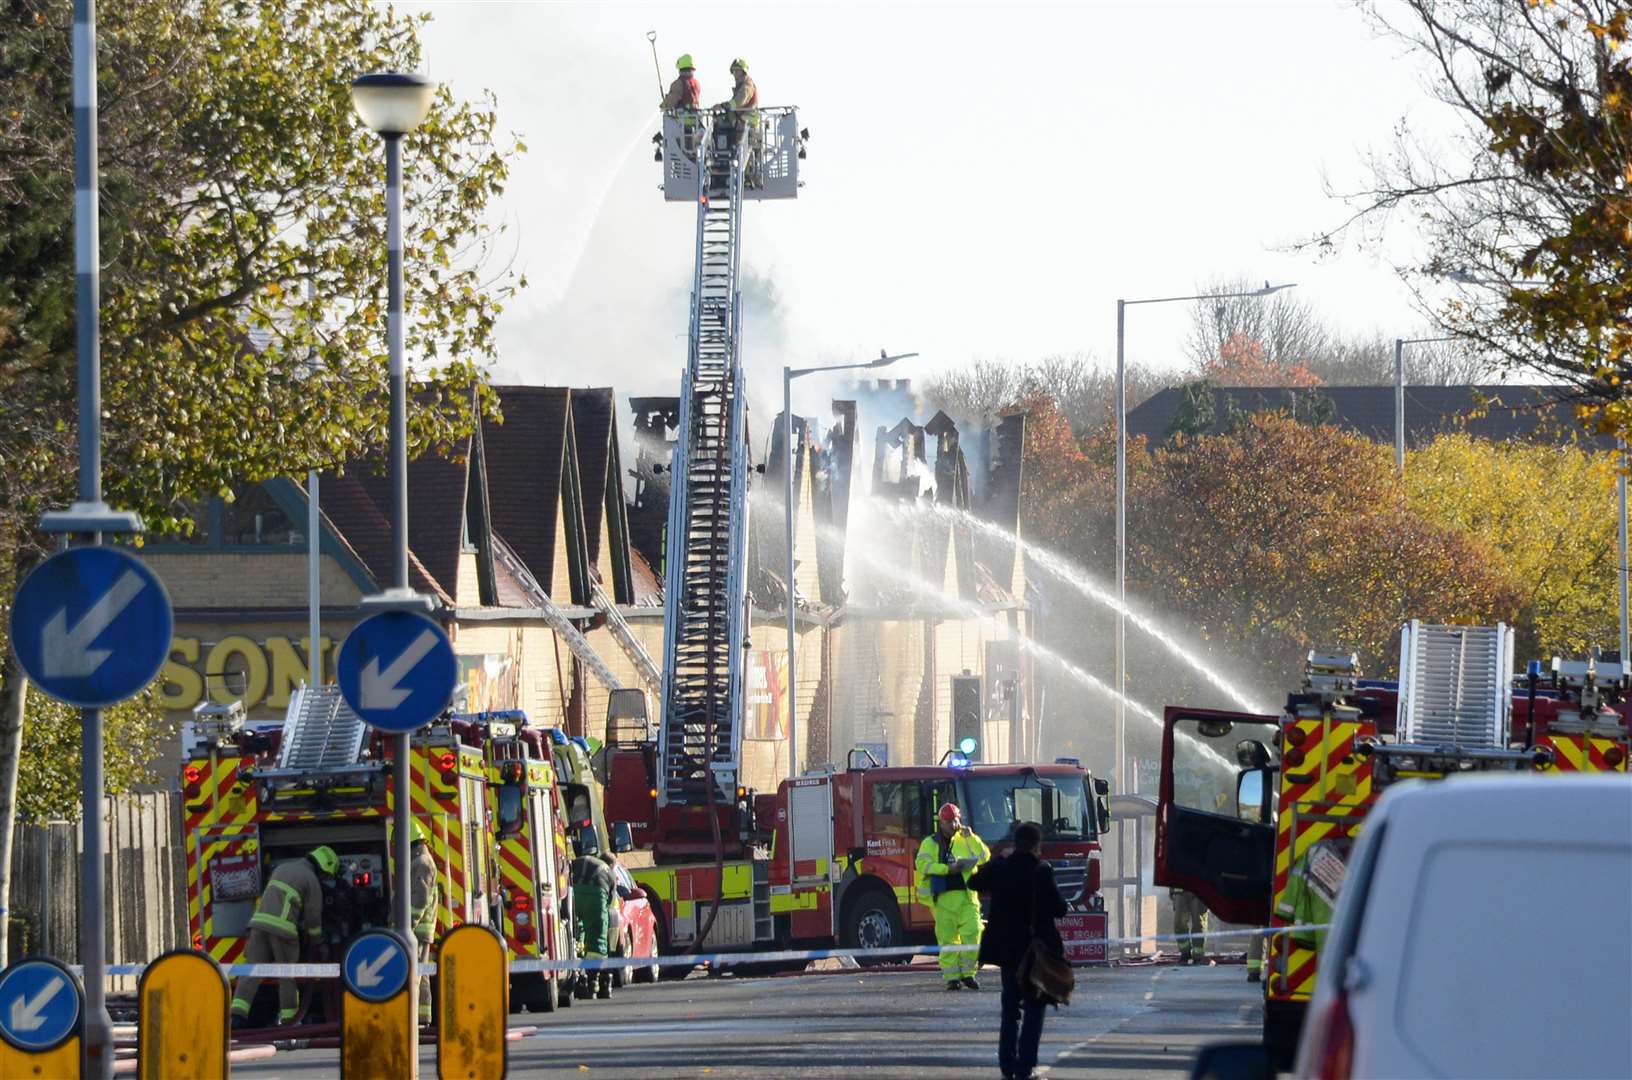 The fire was caused by a deep fat fryer in the cafe. Picture: Paul Amos